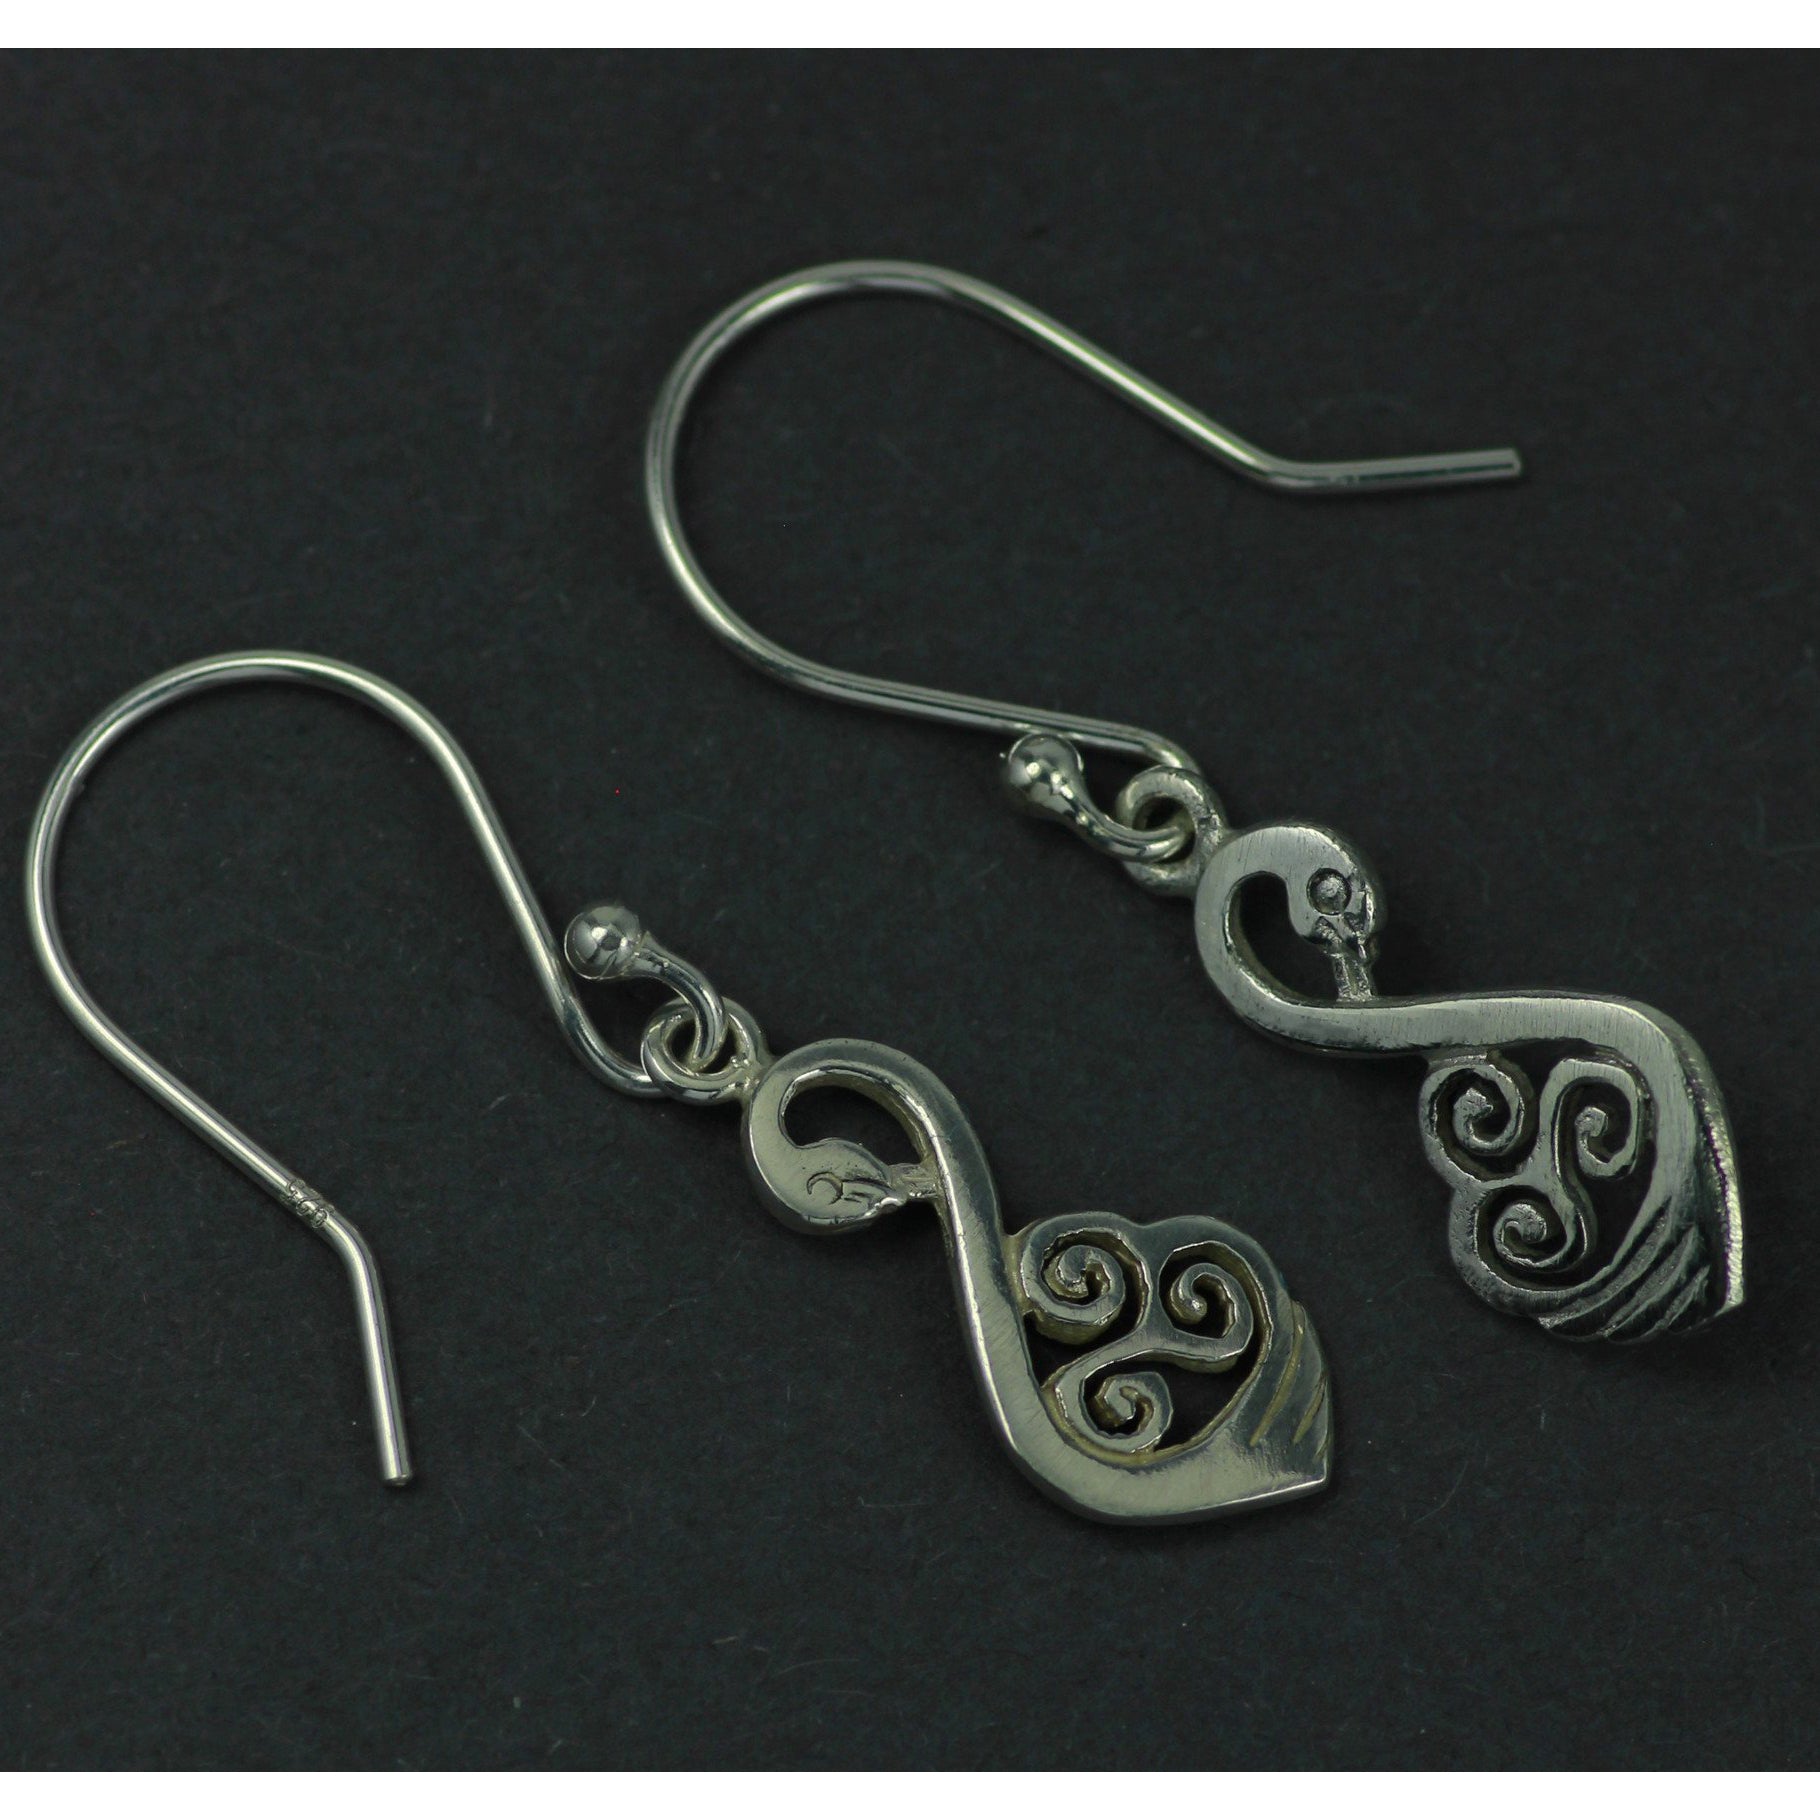 Celtic Swan Drop Earrings, available as a jewelry set with matching pendant! A beautiful sterling silver gift for a special someone!